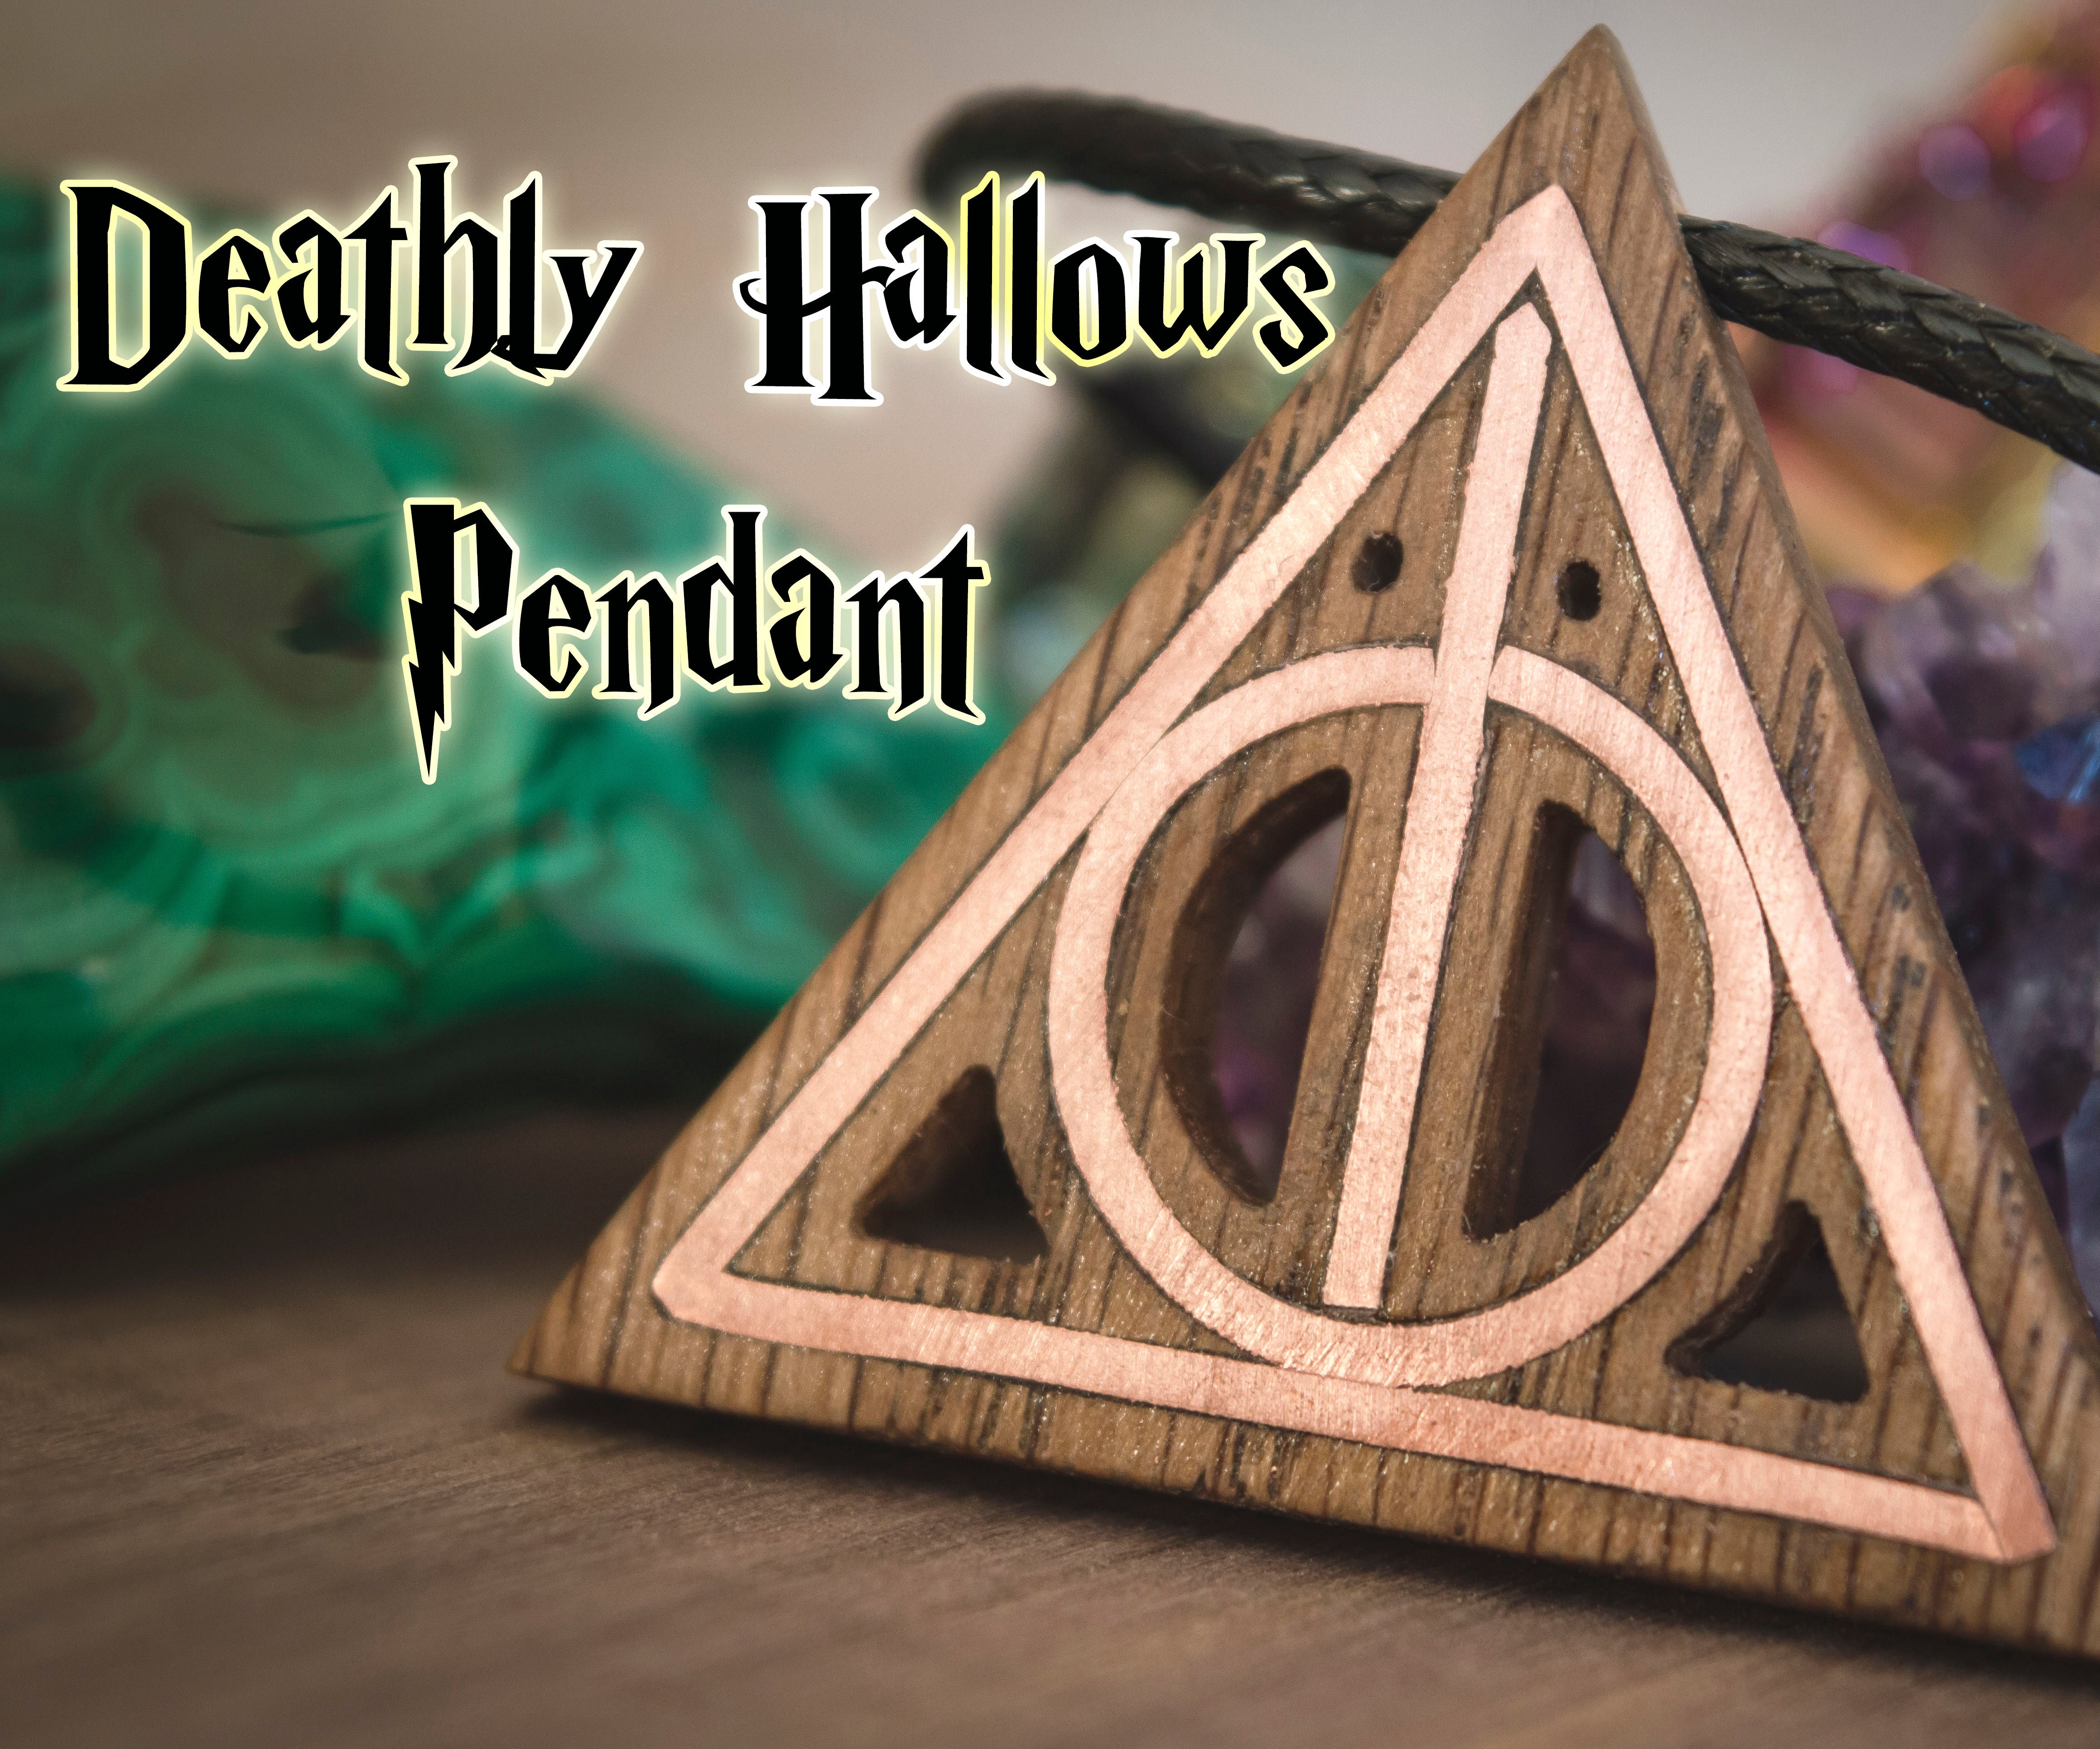 Deathly Hallows Pendant With Copper Inlay